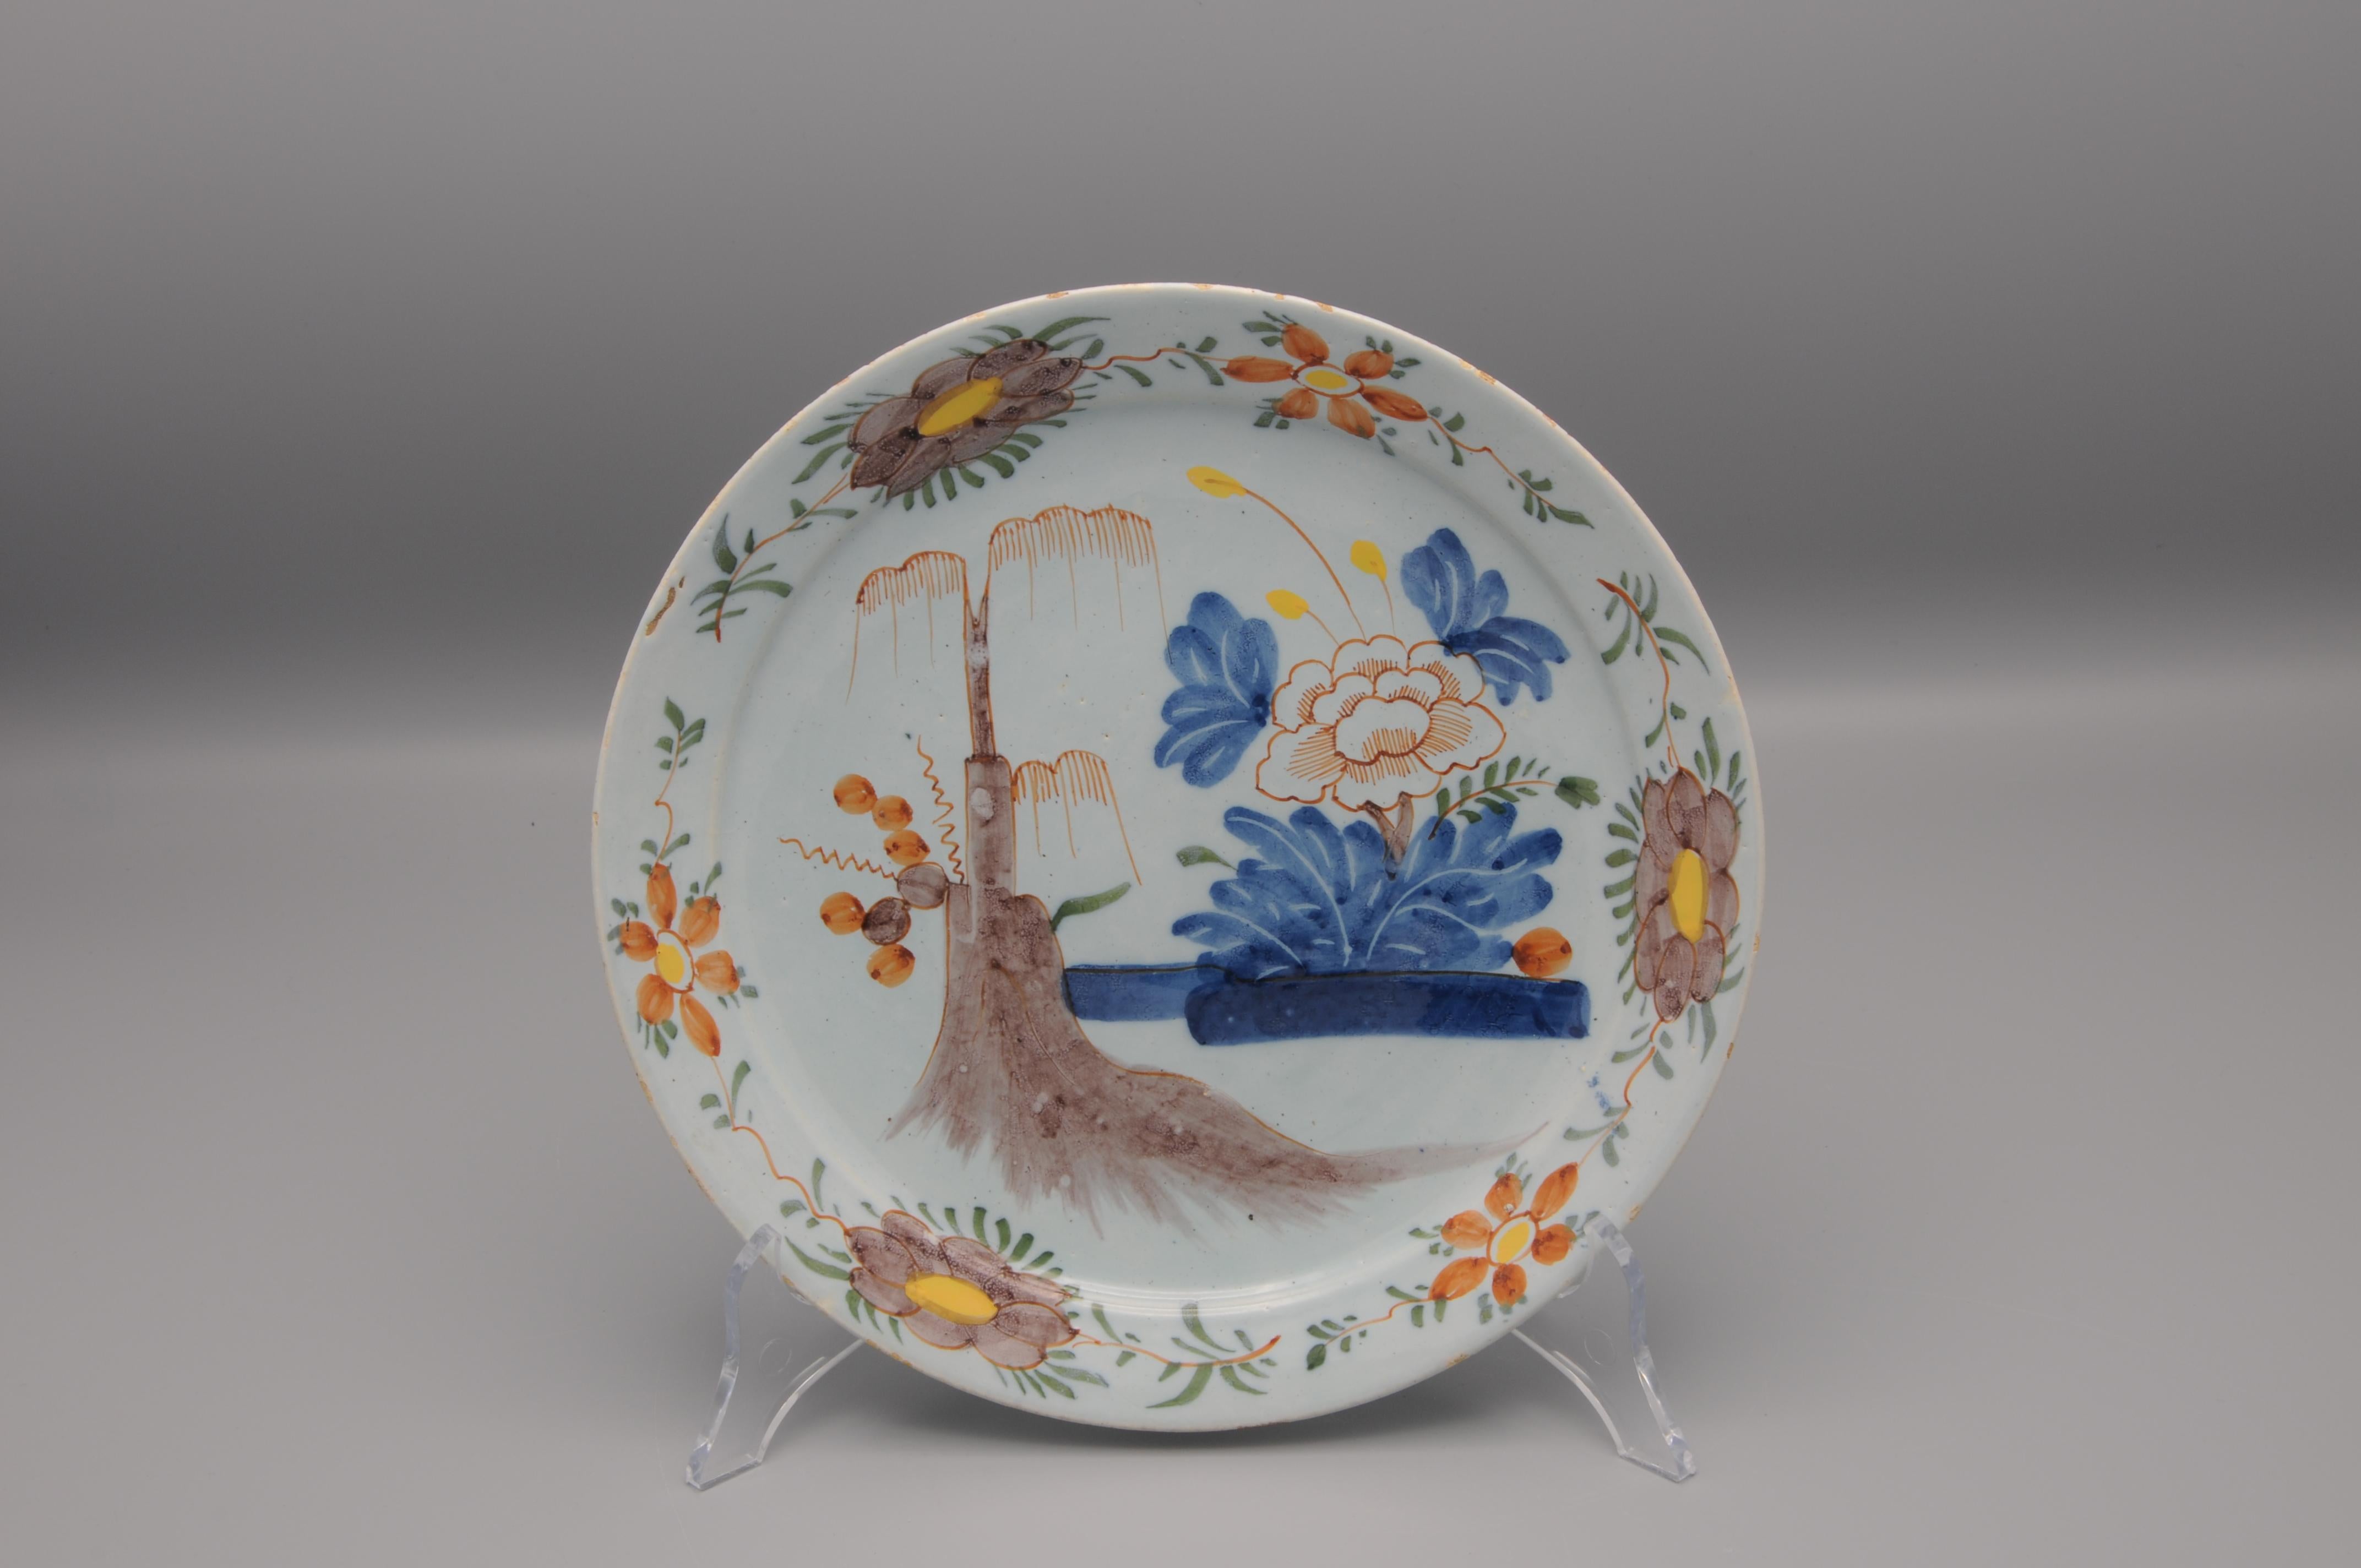 Polychrome Dutch Delft Chinoiserie plate featuring blossoming peony and a willow tree
Beautiful chinoiserie alternating flowers on the rim

Very good condition: usual wear to the rim.